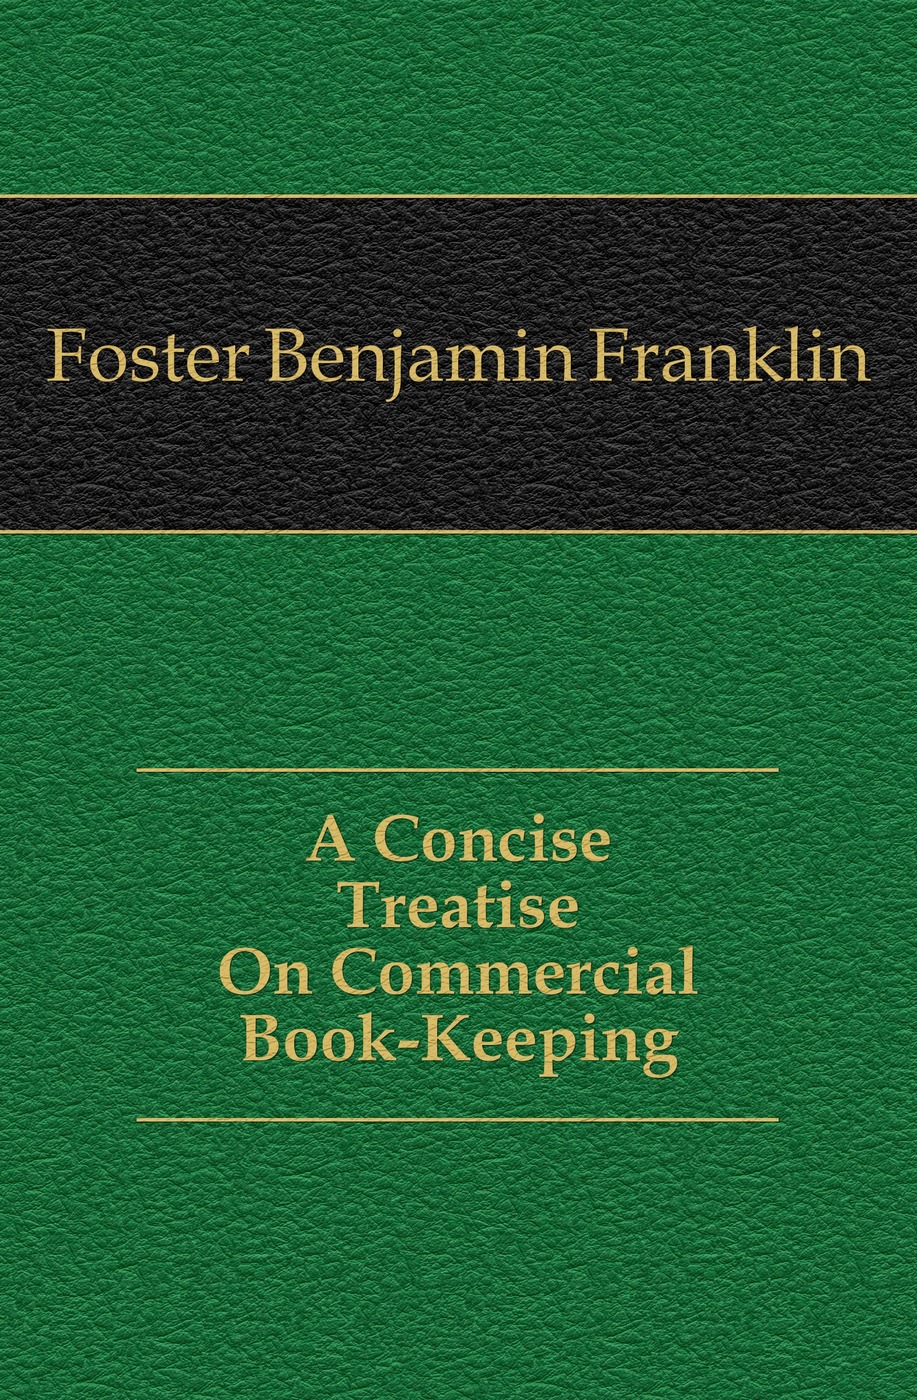 A Concise Treatise On Commercial Book-Keeping